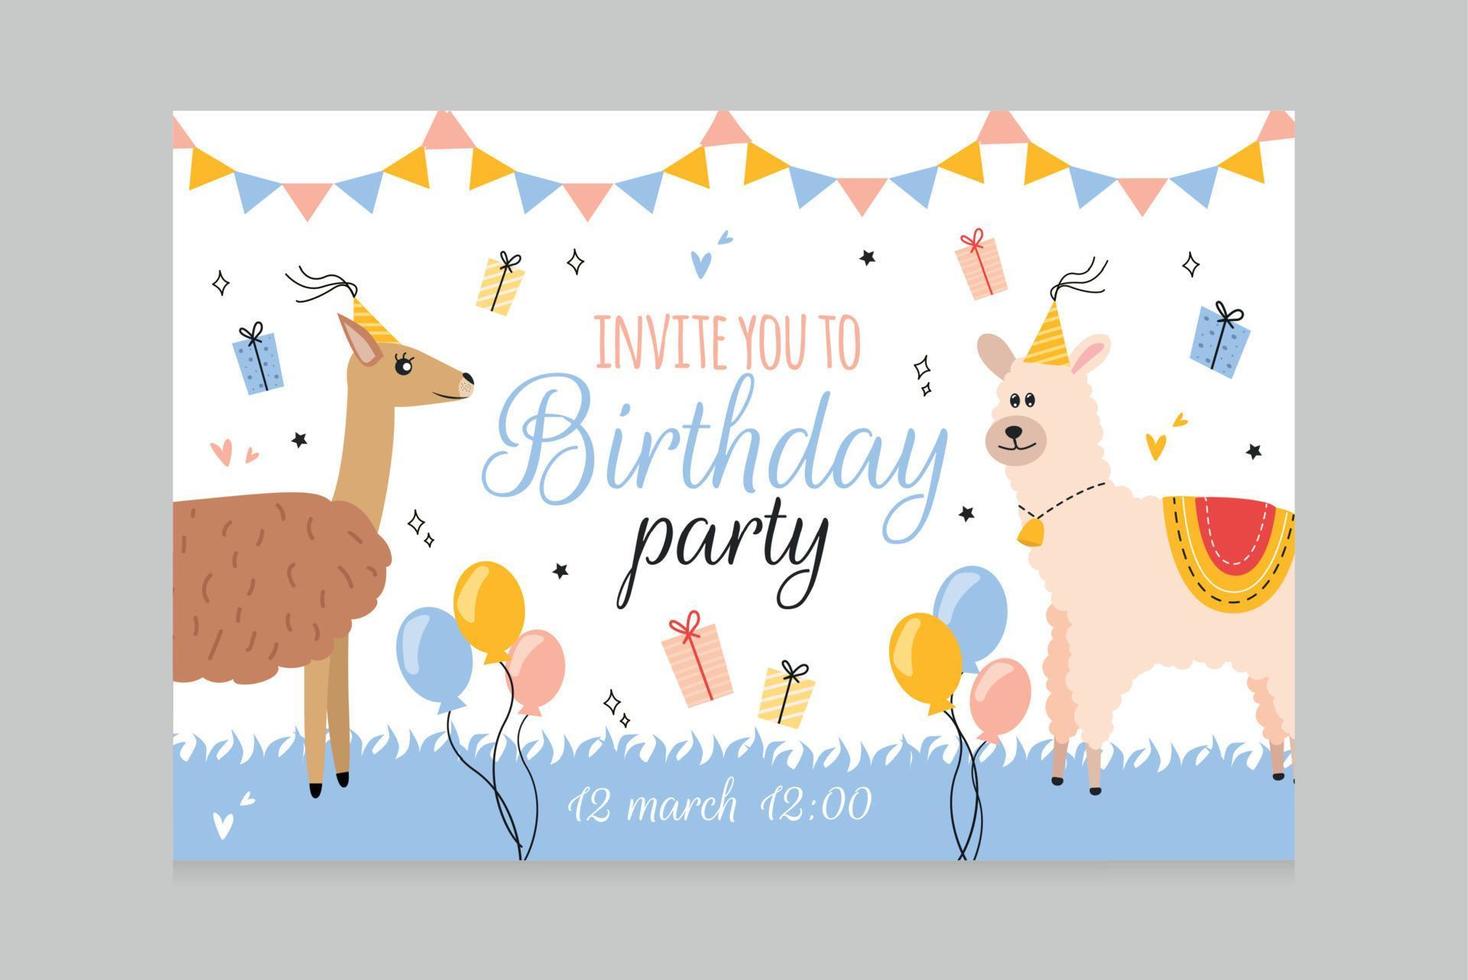 Vector illustration invitation card with guanaco and alpaca animals in holiday caps, gift boxes, holiday pennants, balloons, invitation you to birthday party lettering, hearts, stars, doodle